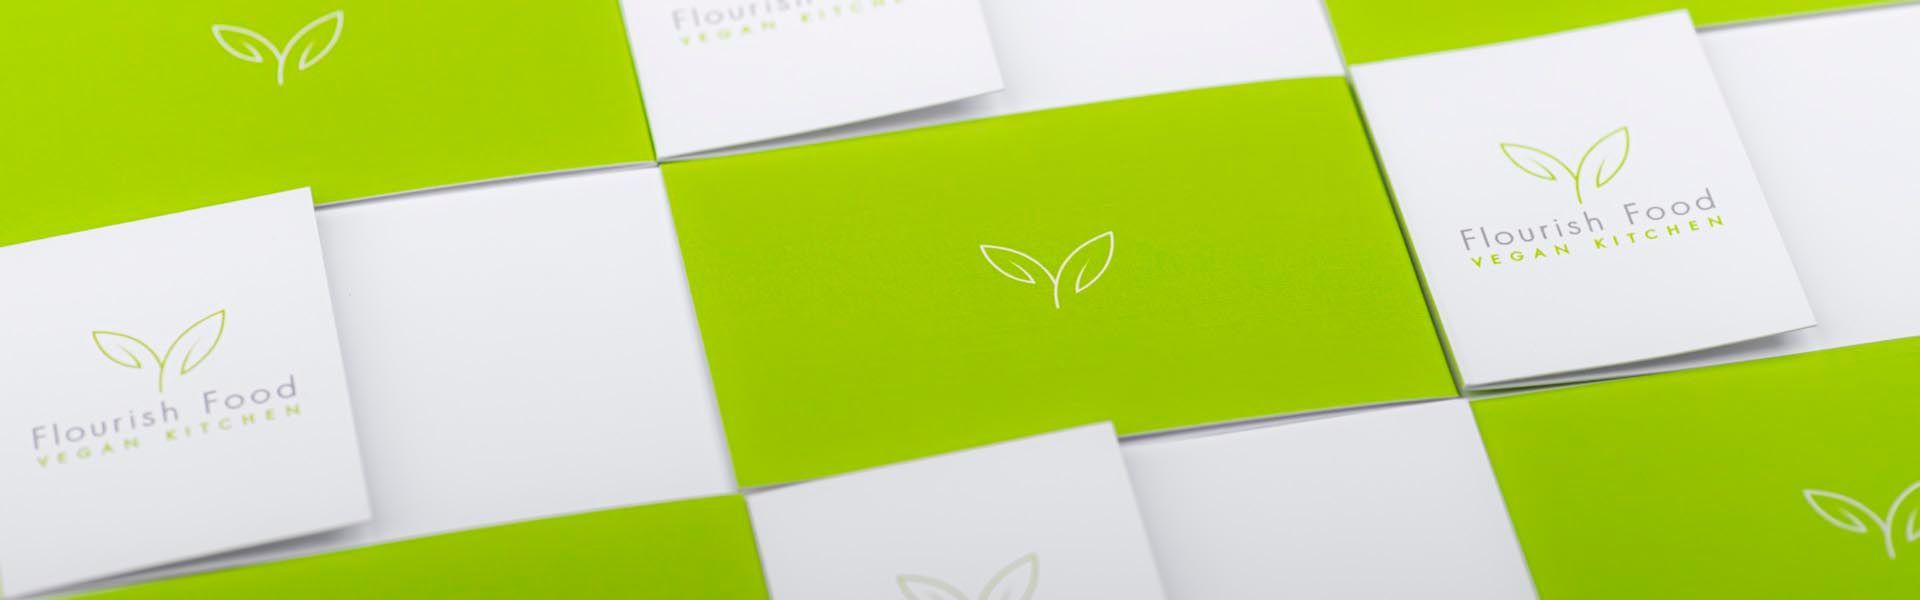 green and white brochures for flourish food vegan kitchen